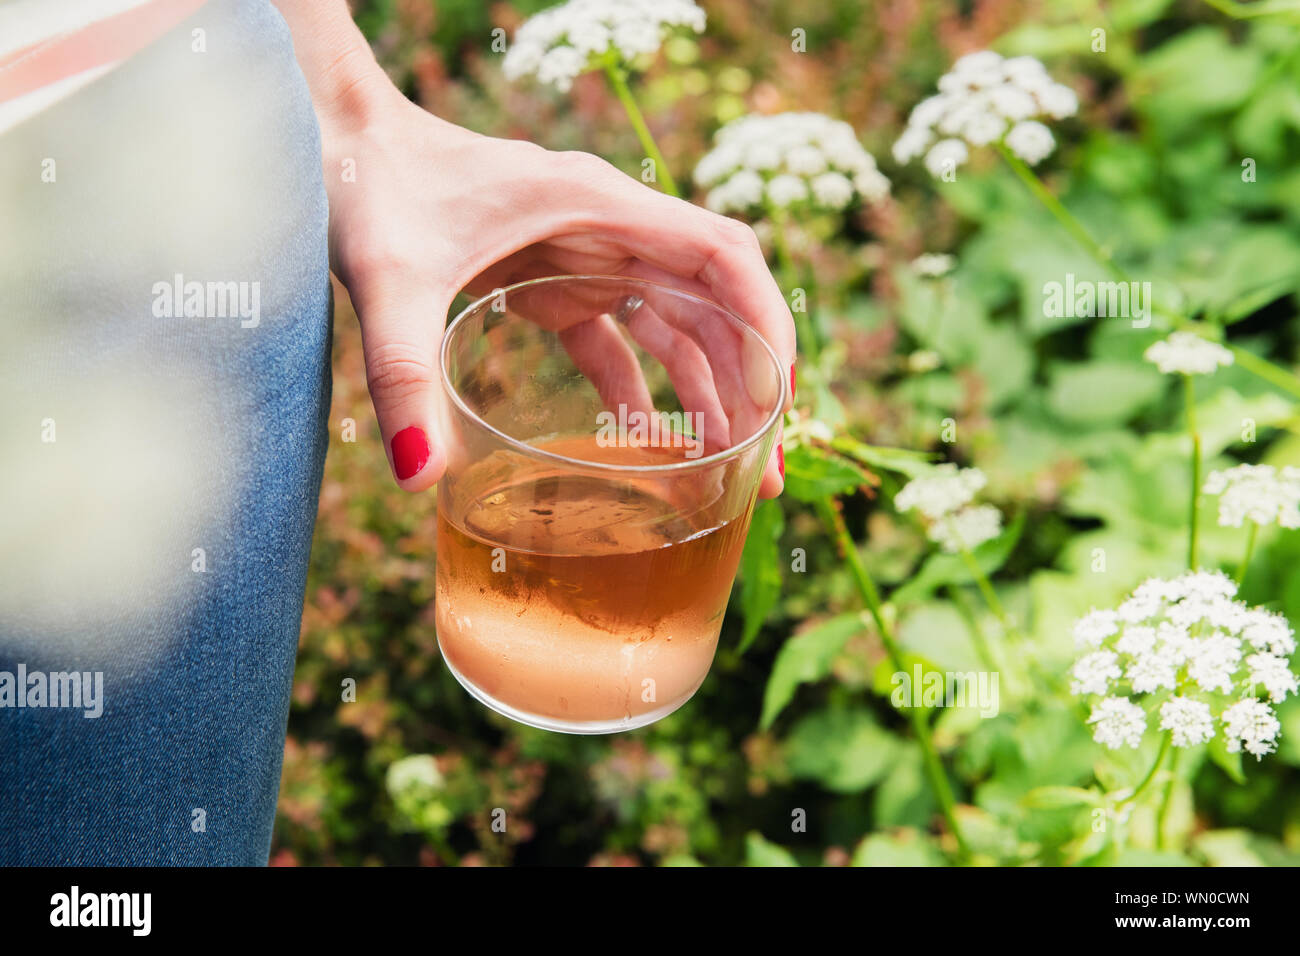 Woman holding glass of rose wine in garden Stock Photo